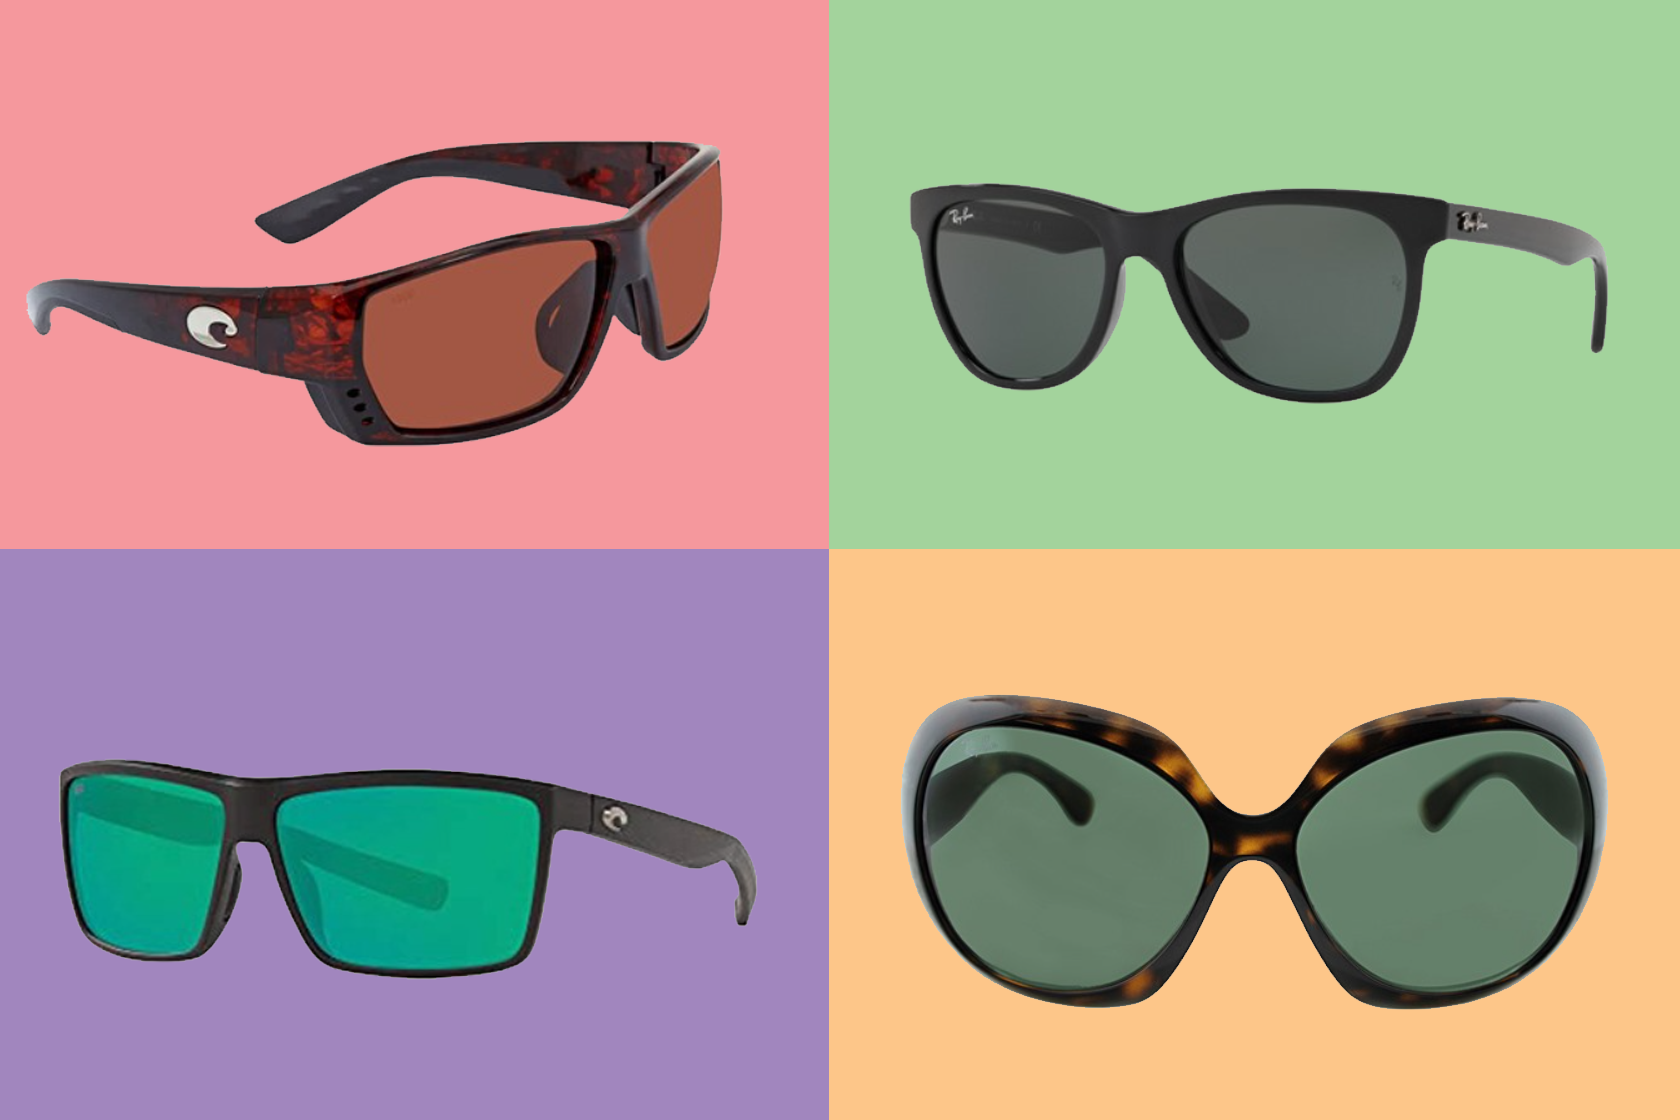 Get 65% off Ray-Ban, Oakley, and other sunglasses from Woot!